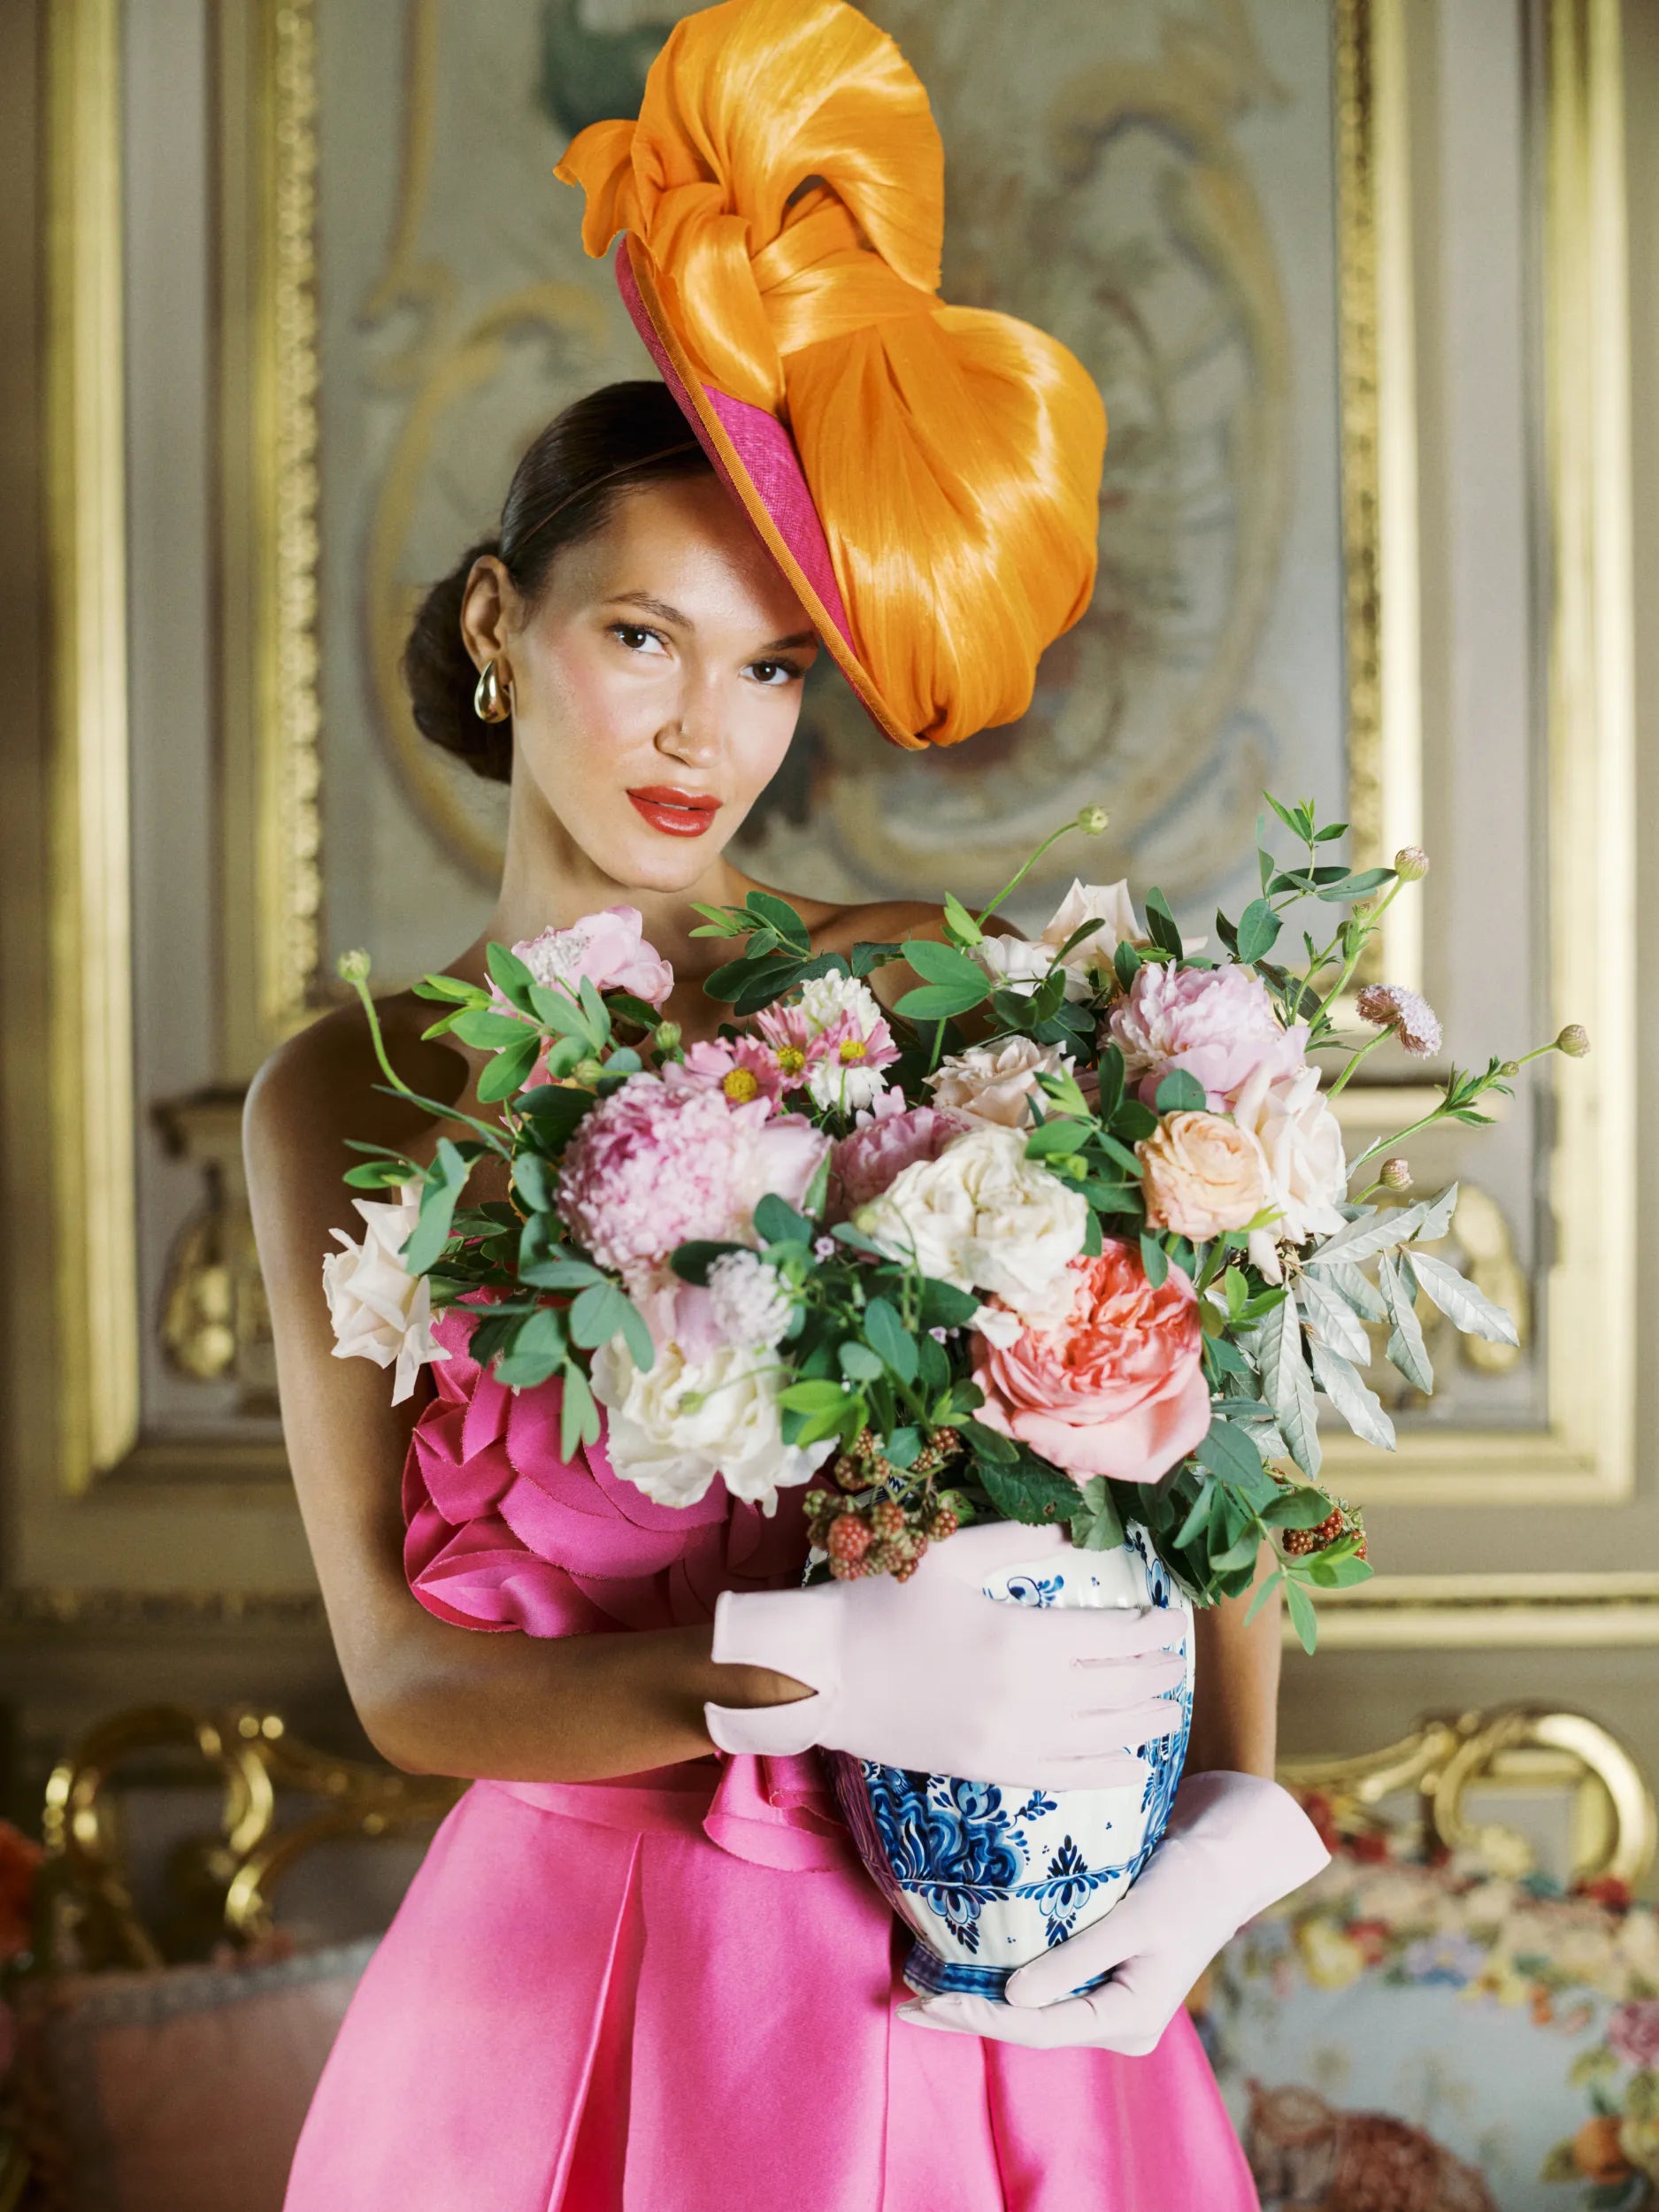 Woman holding a vase of flowers wearing light pink day gloves.